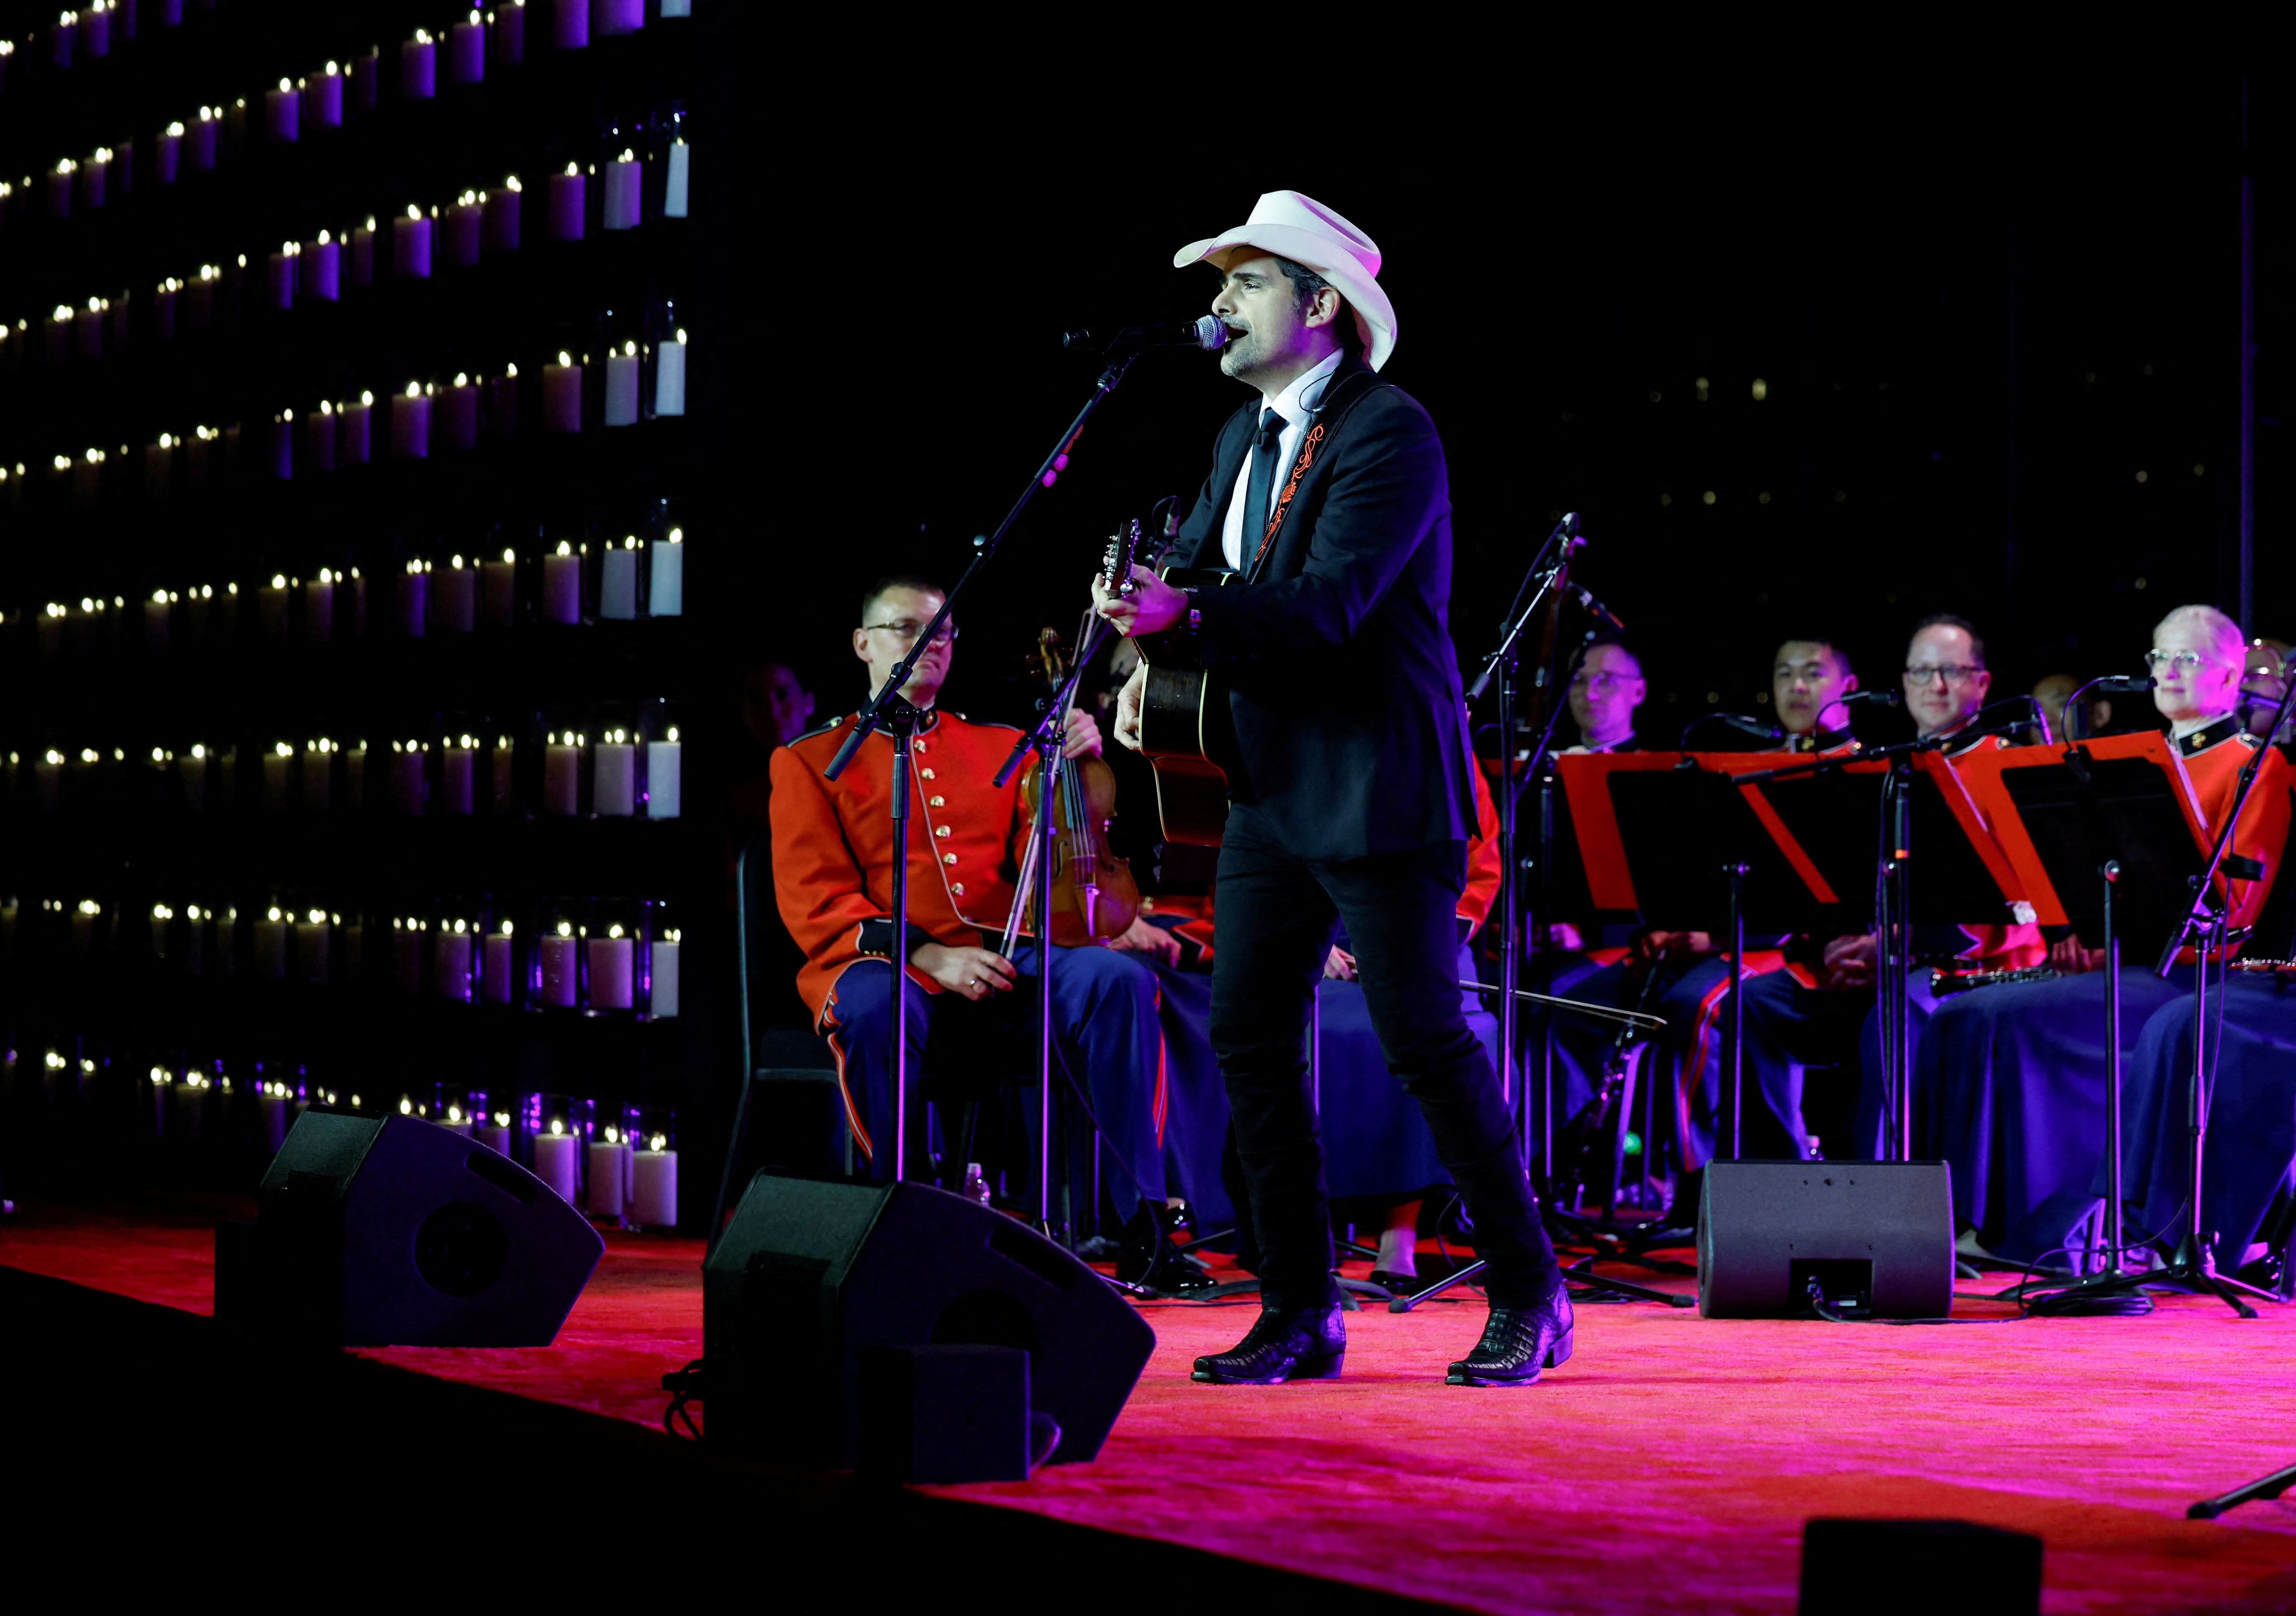 Singer Brad Paisley performs during the State Dinner at the White House on Thursday